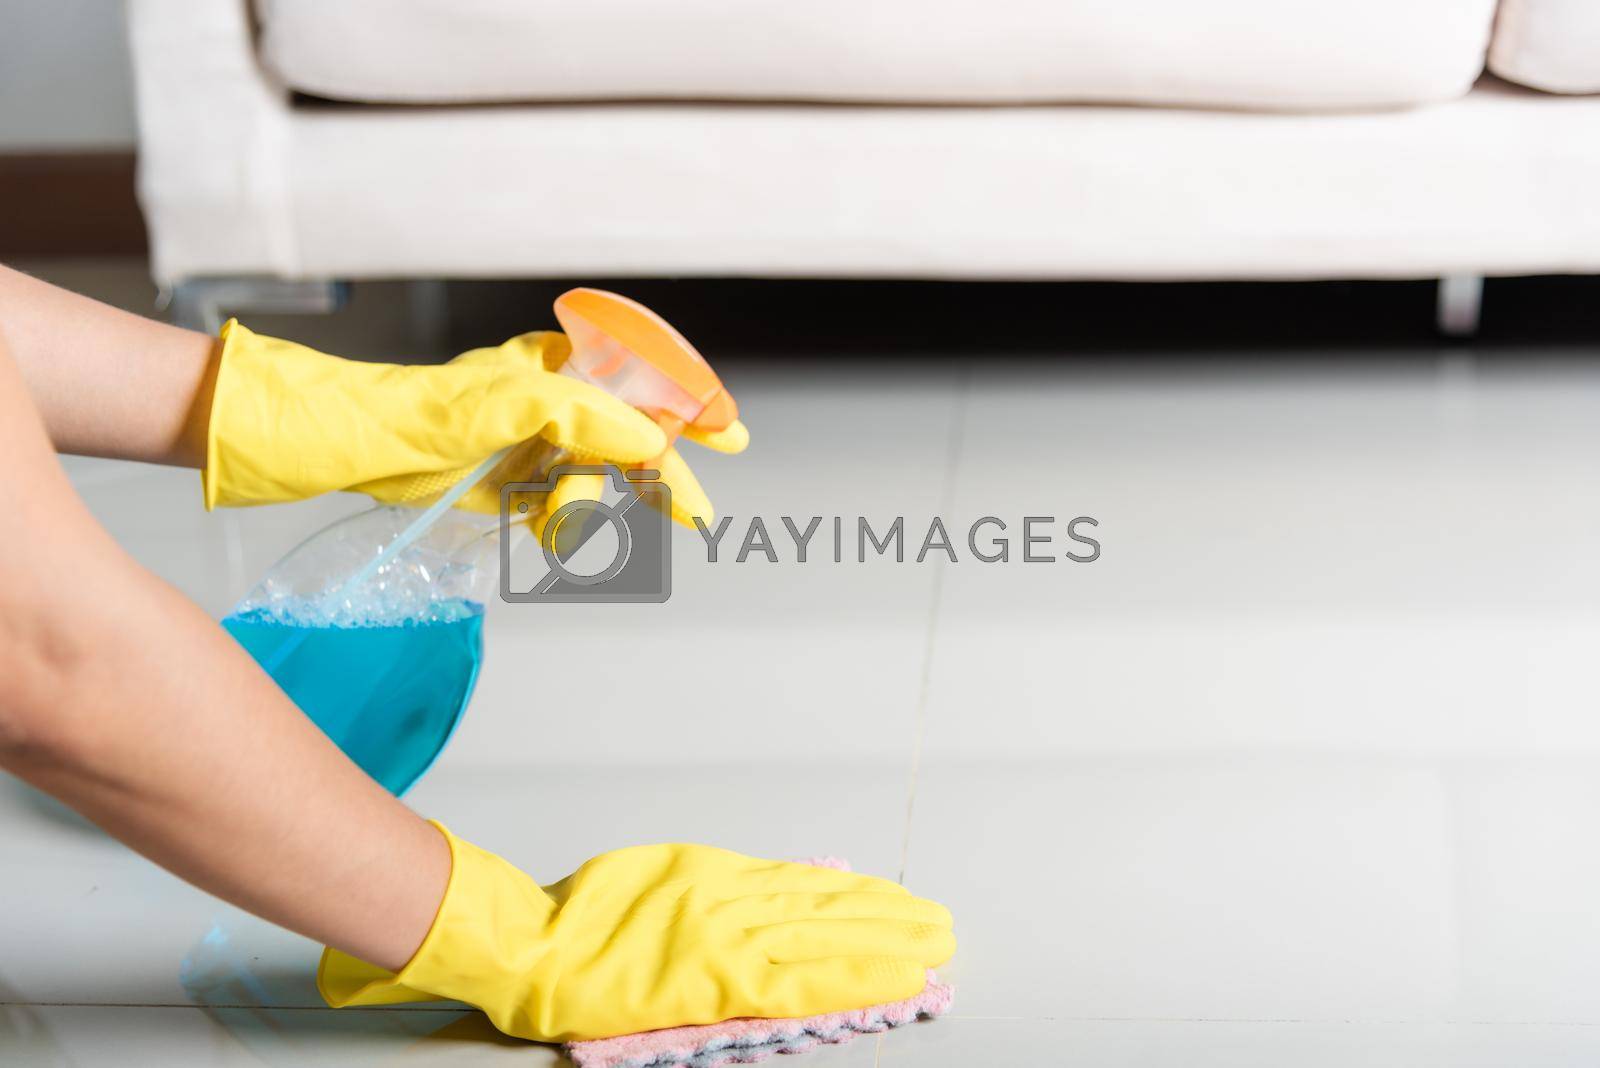 Royalty free image of Asian woman wearing yellow rubber glover with cloth rag and detergent spray cleaning floor at home in living room by Sorapop